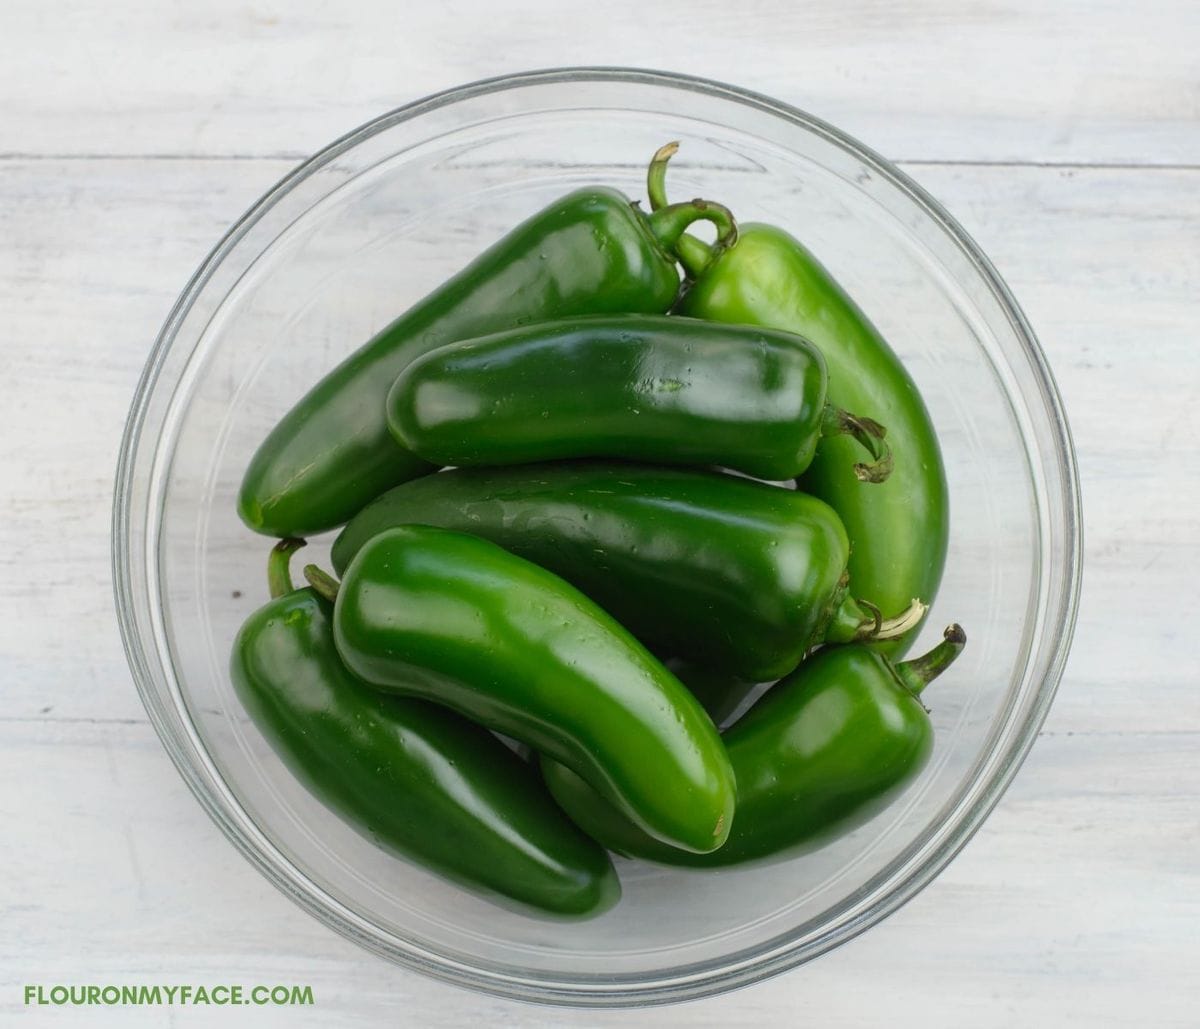 A glass bowl filled with fresh jalapeno peppers.